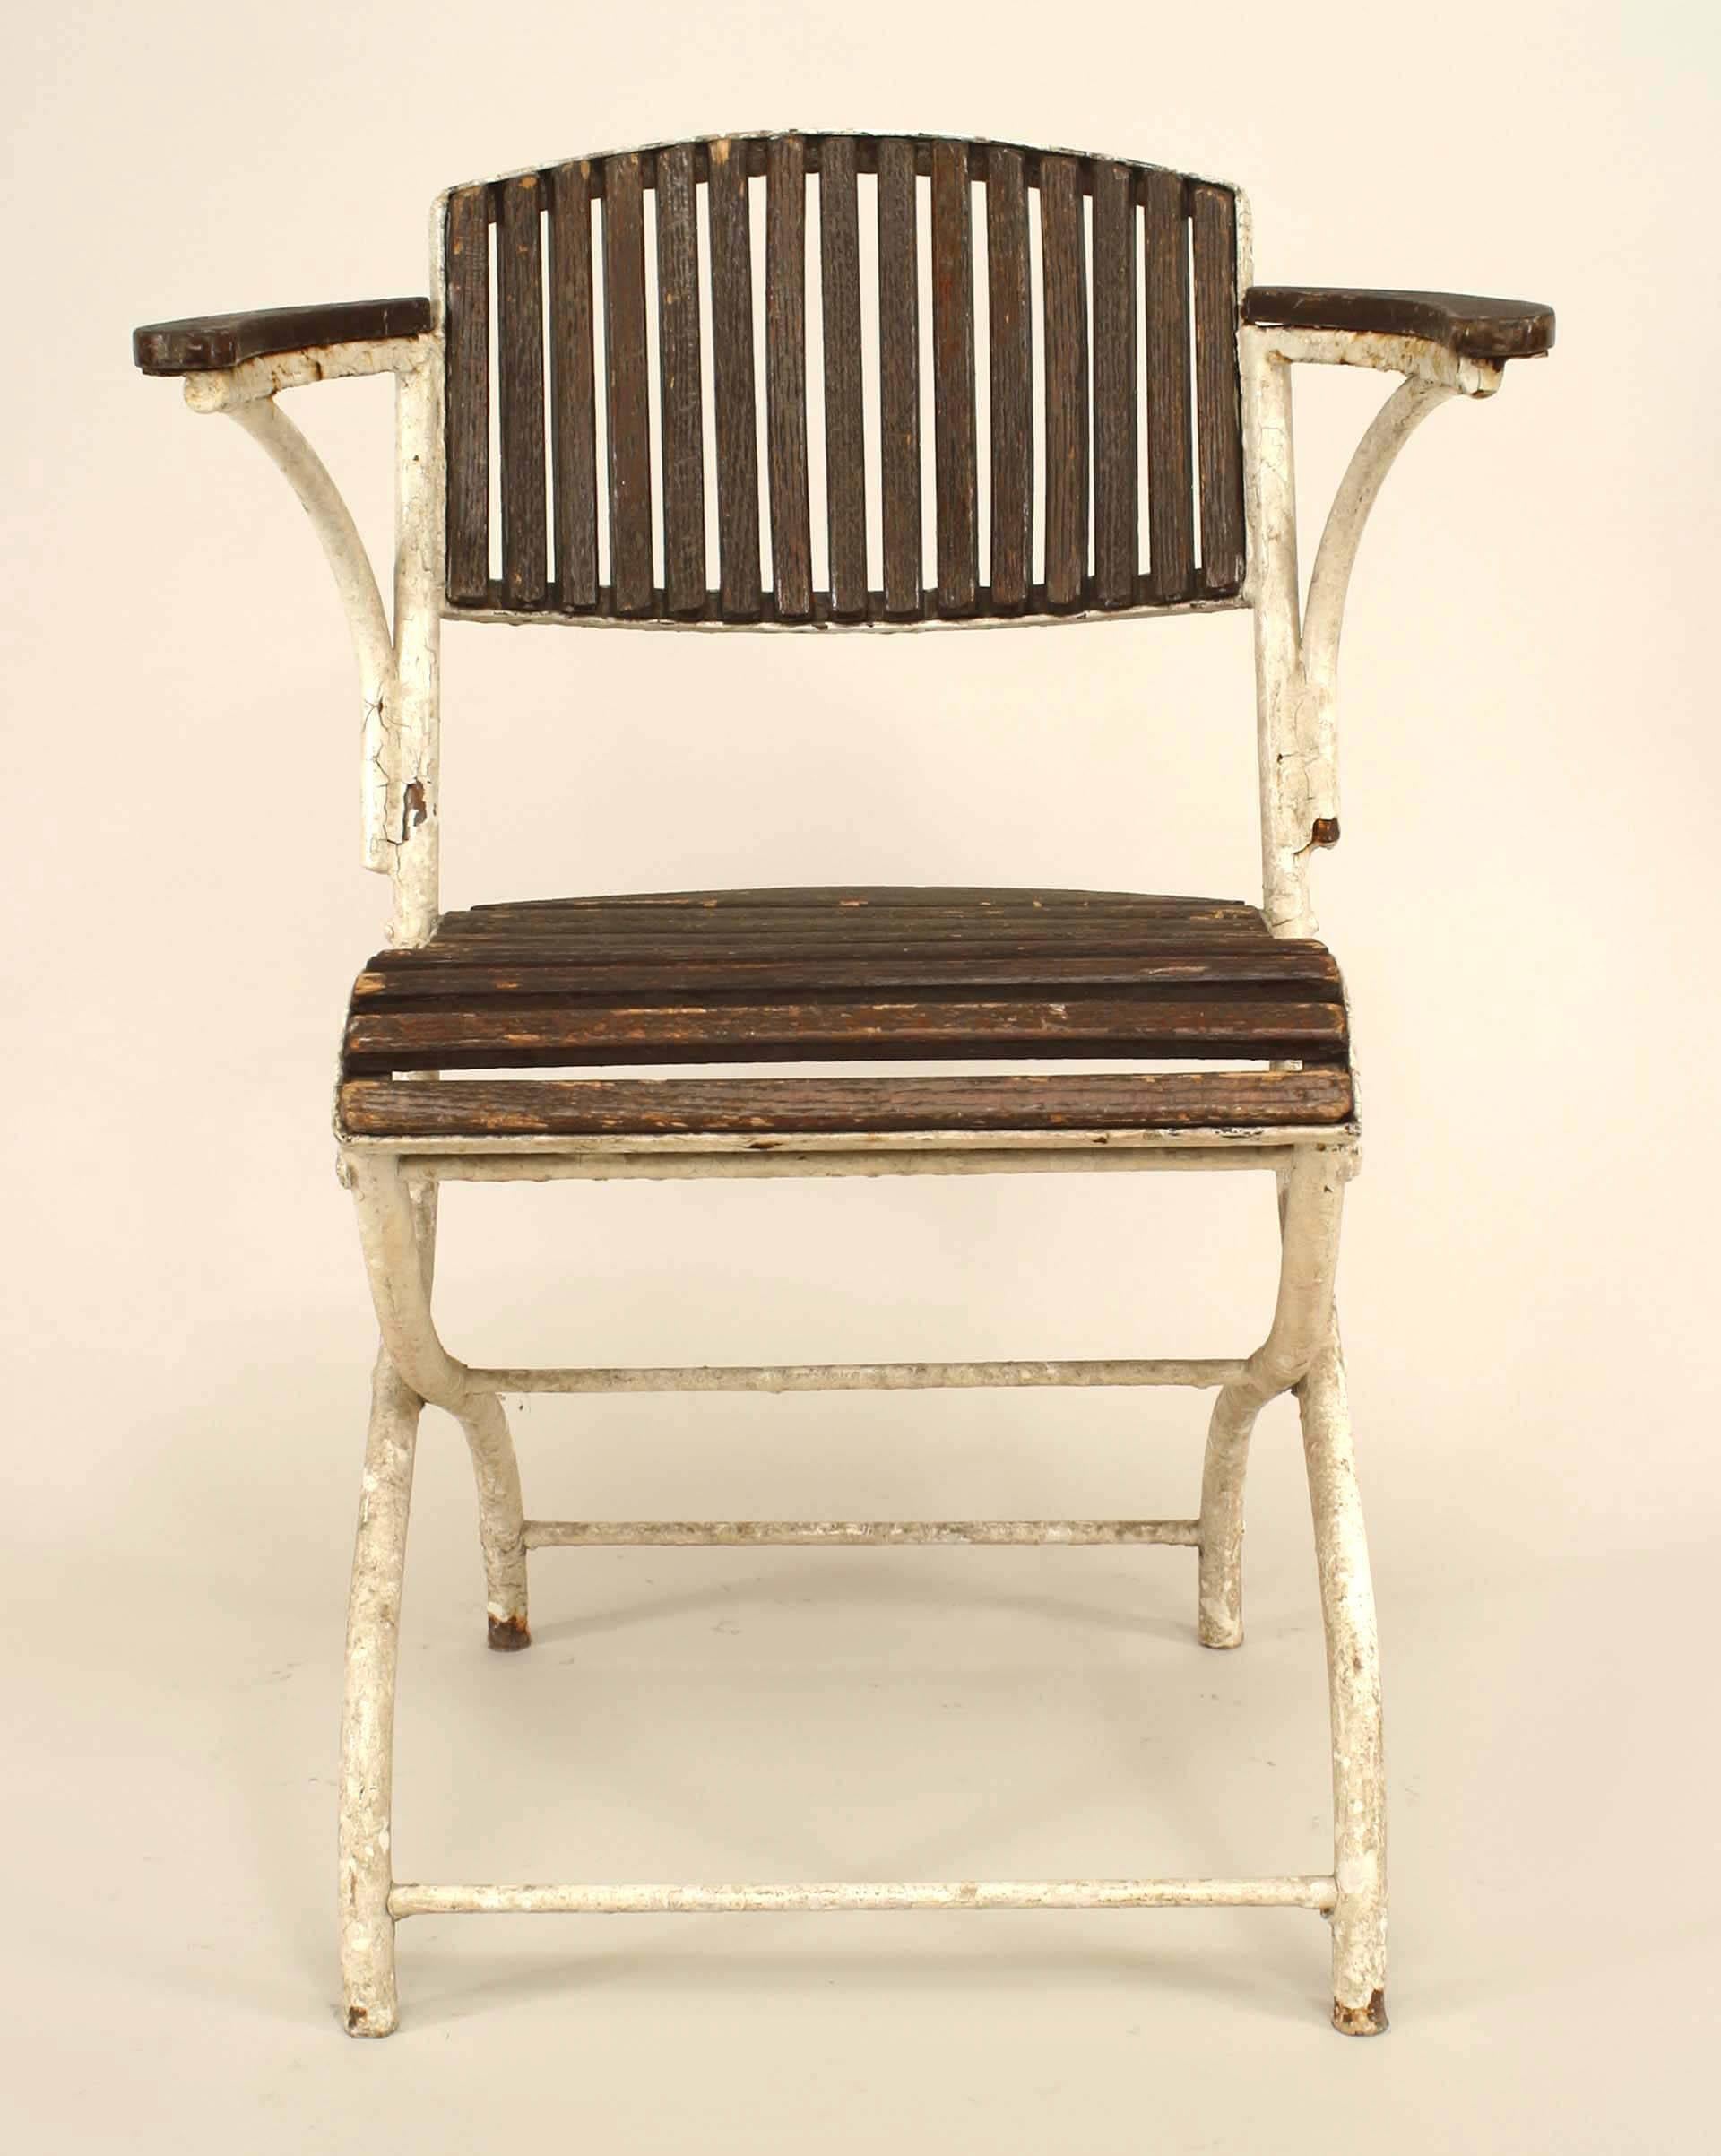 Set of 6 French Art Deco outdoor white painted iron folding round back arm chairs with slat wood seat and back.
